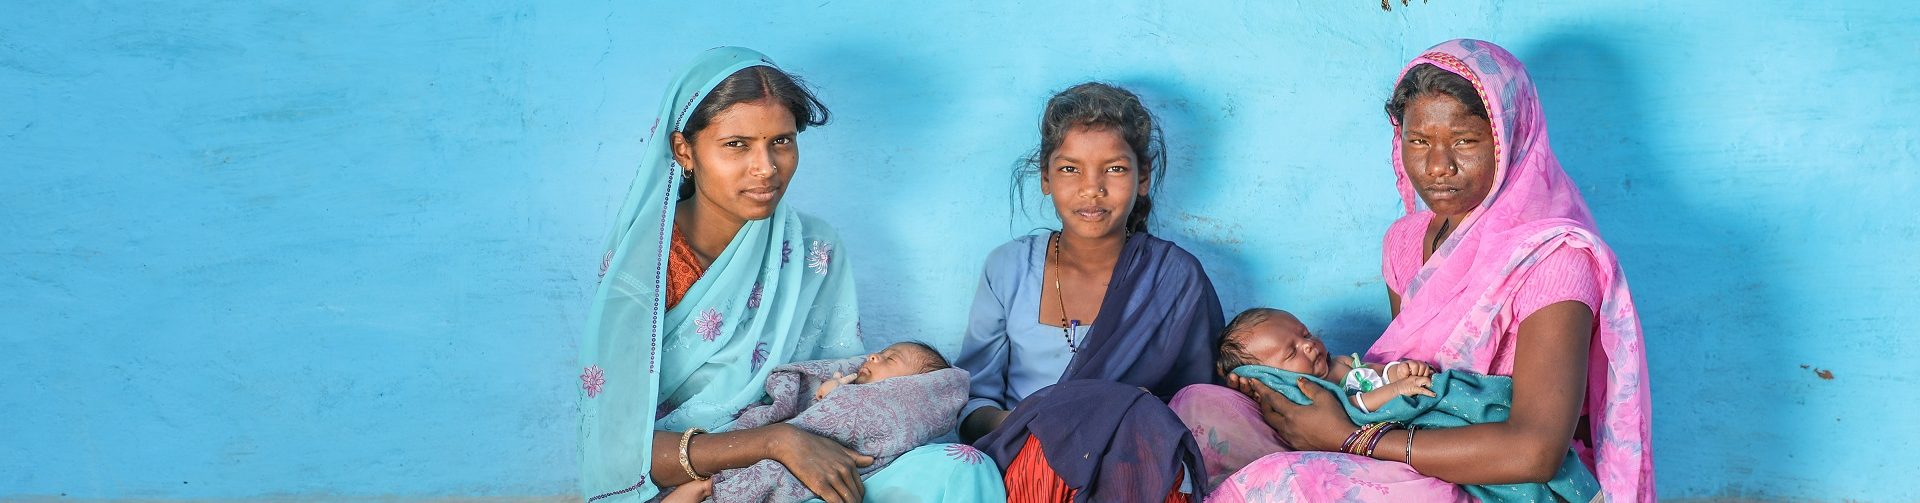 Study shows links between teenage pregnancy and child undernutrition in India